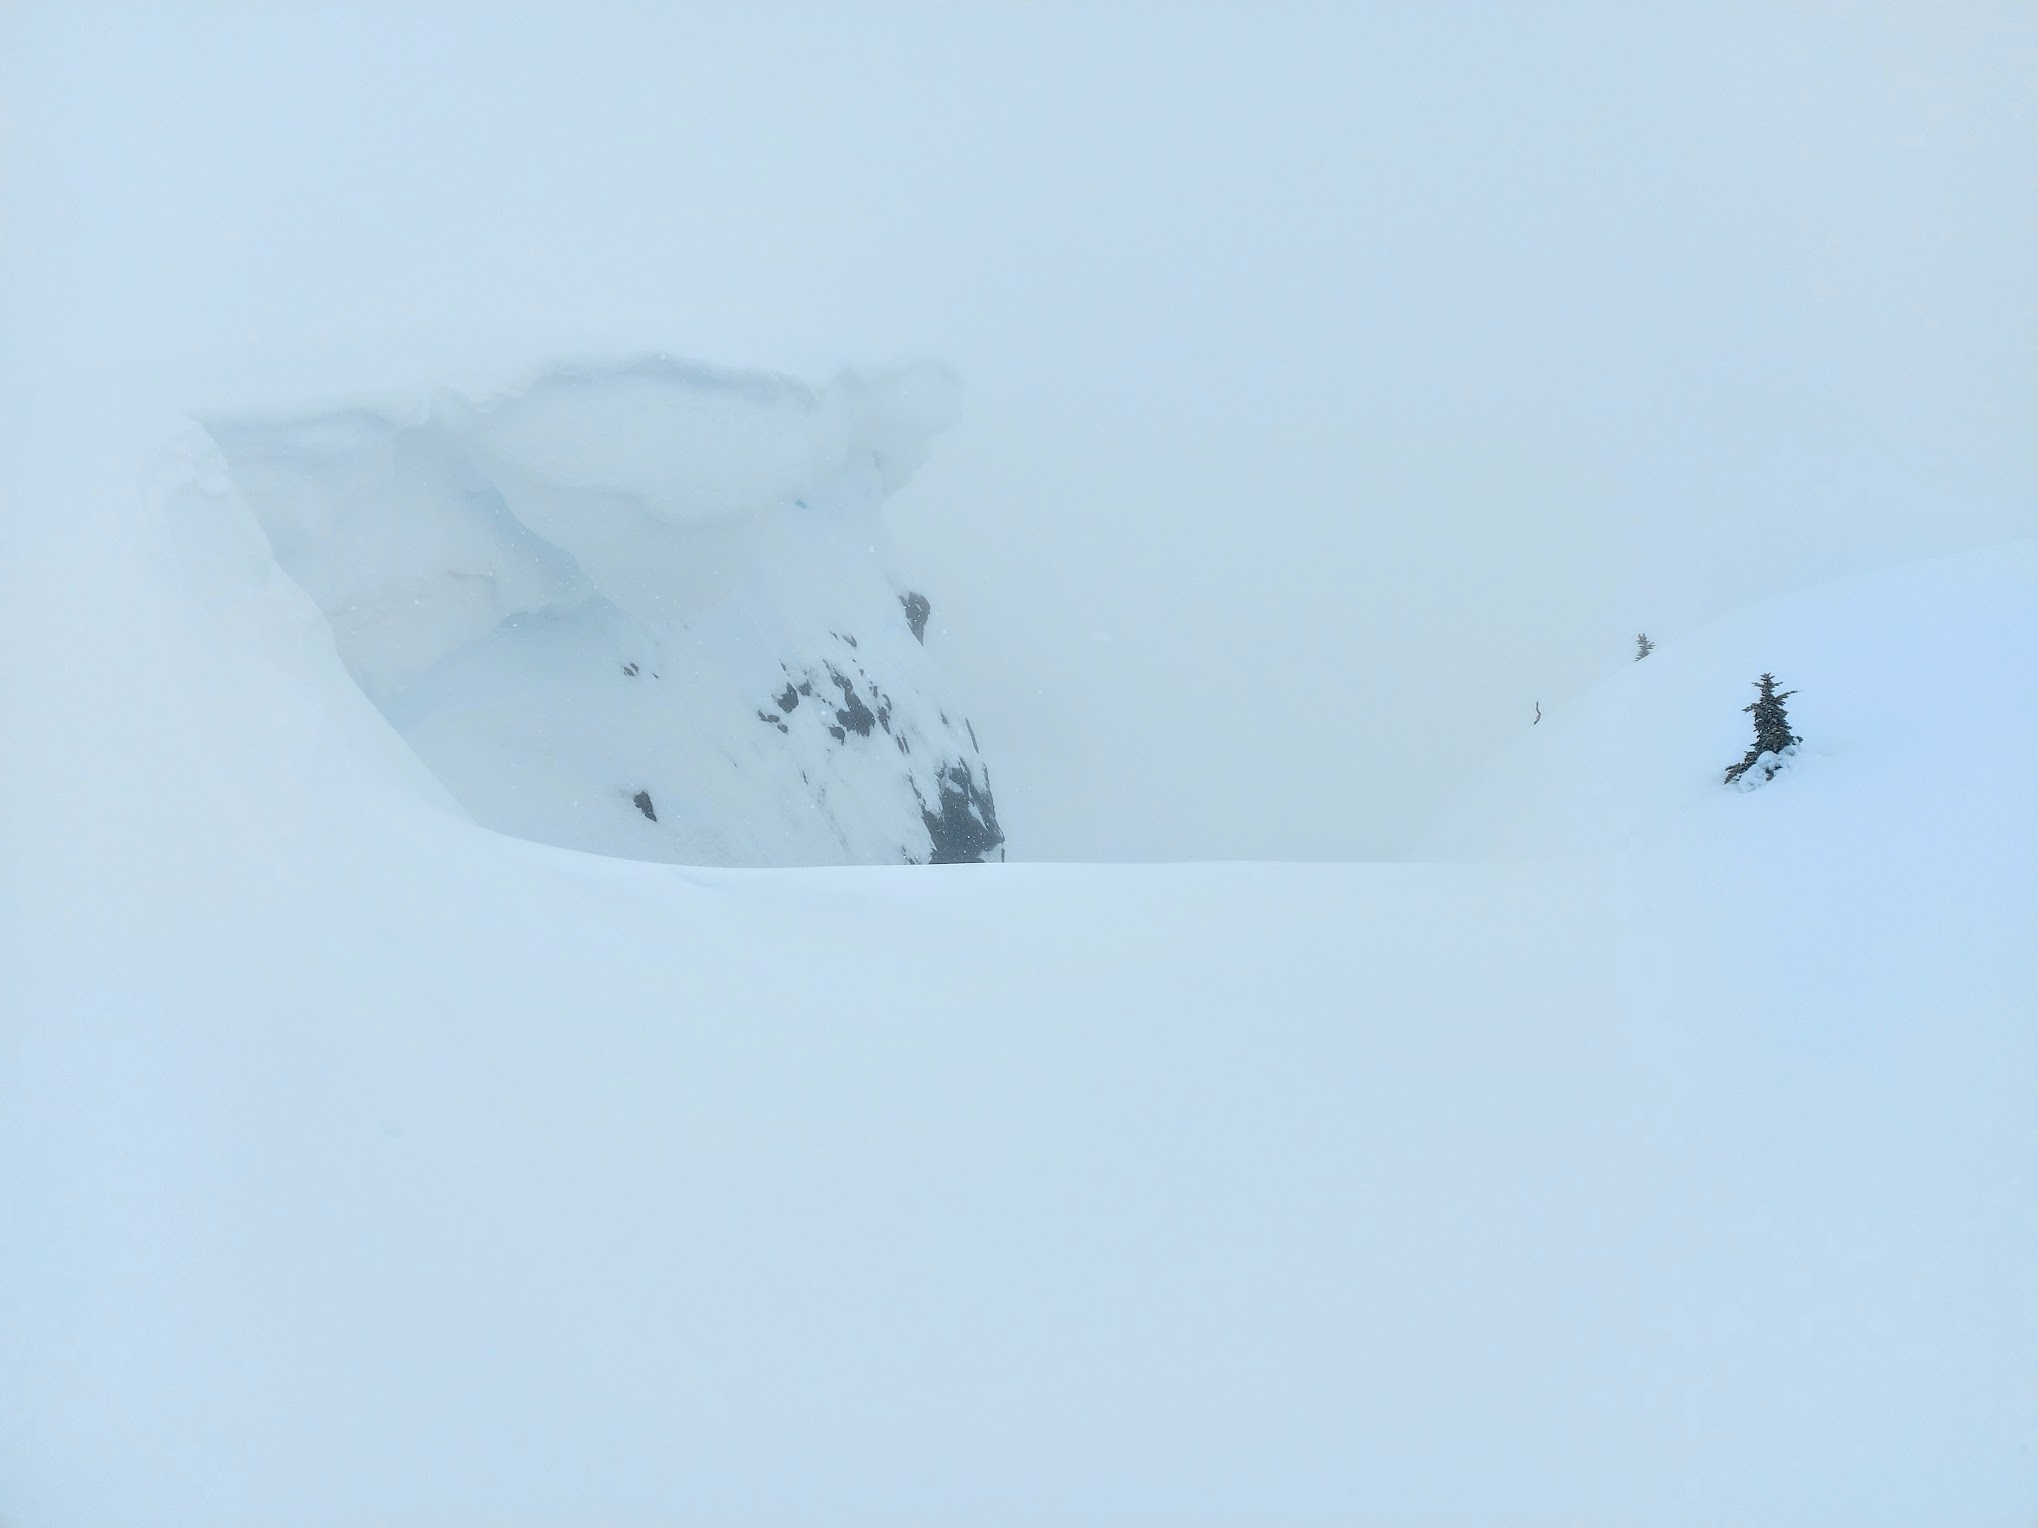 Cornice in poor visibility